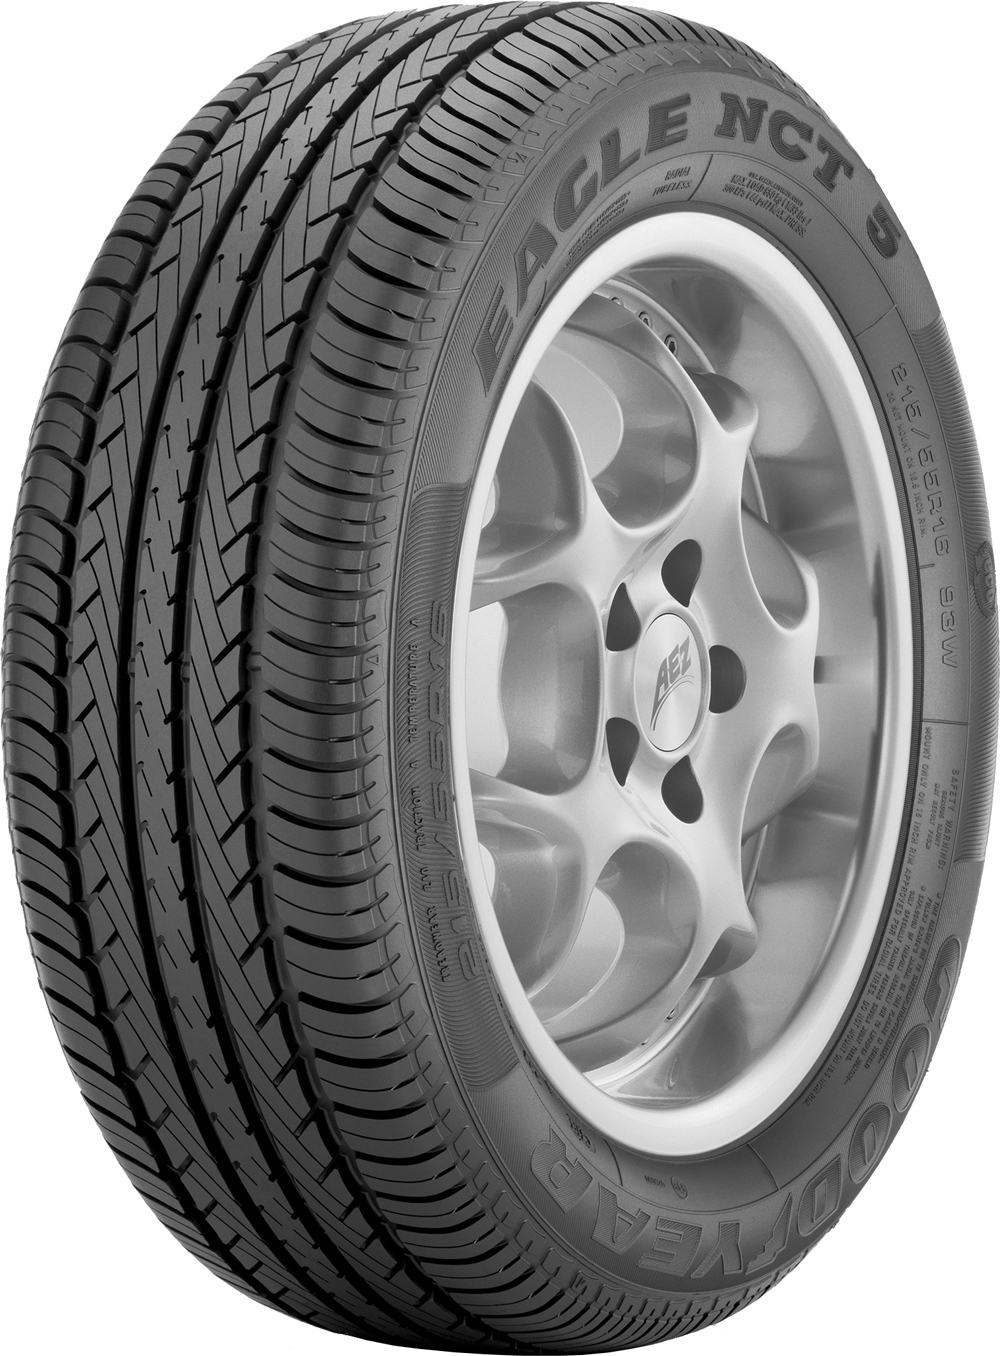 Anvelope auto GOODYEAR EAGLE NCT5 RFT BMW FP 245/45 R17 95Y